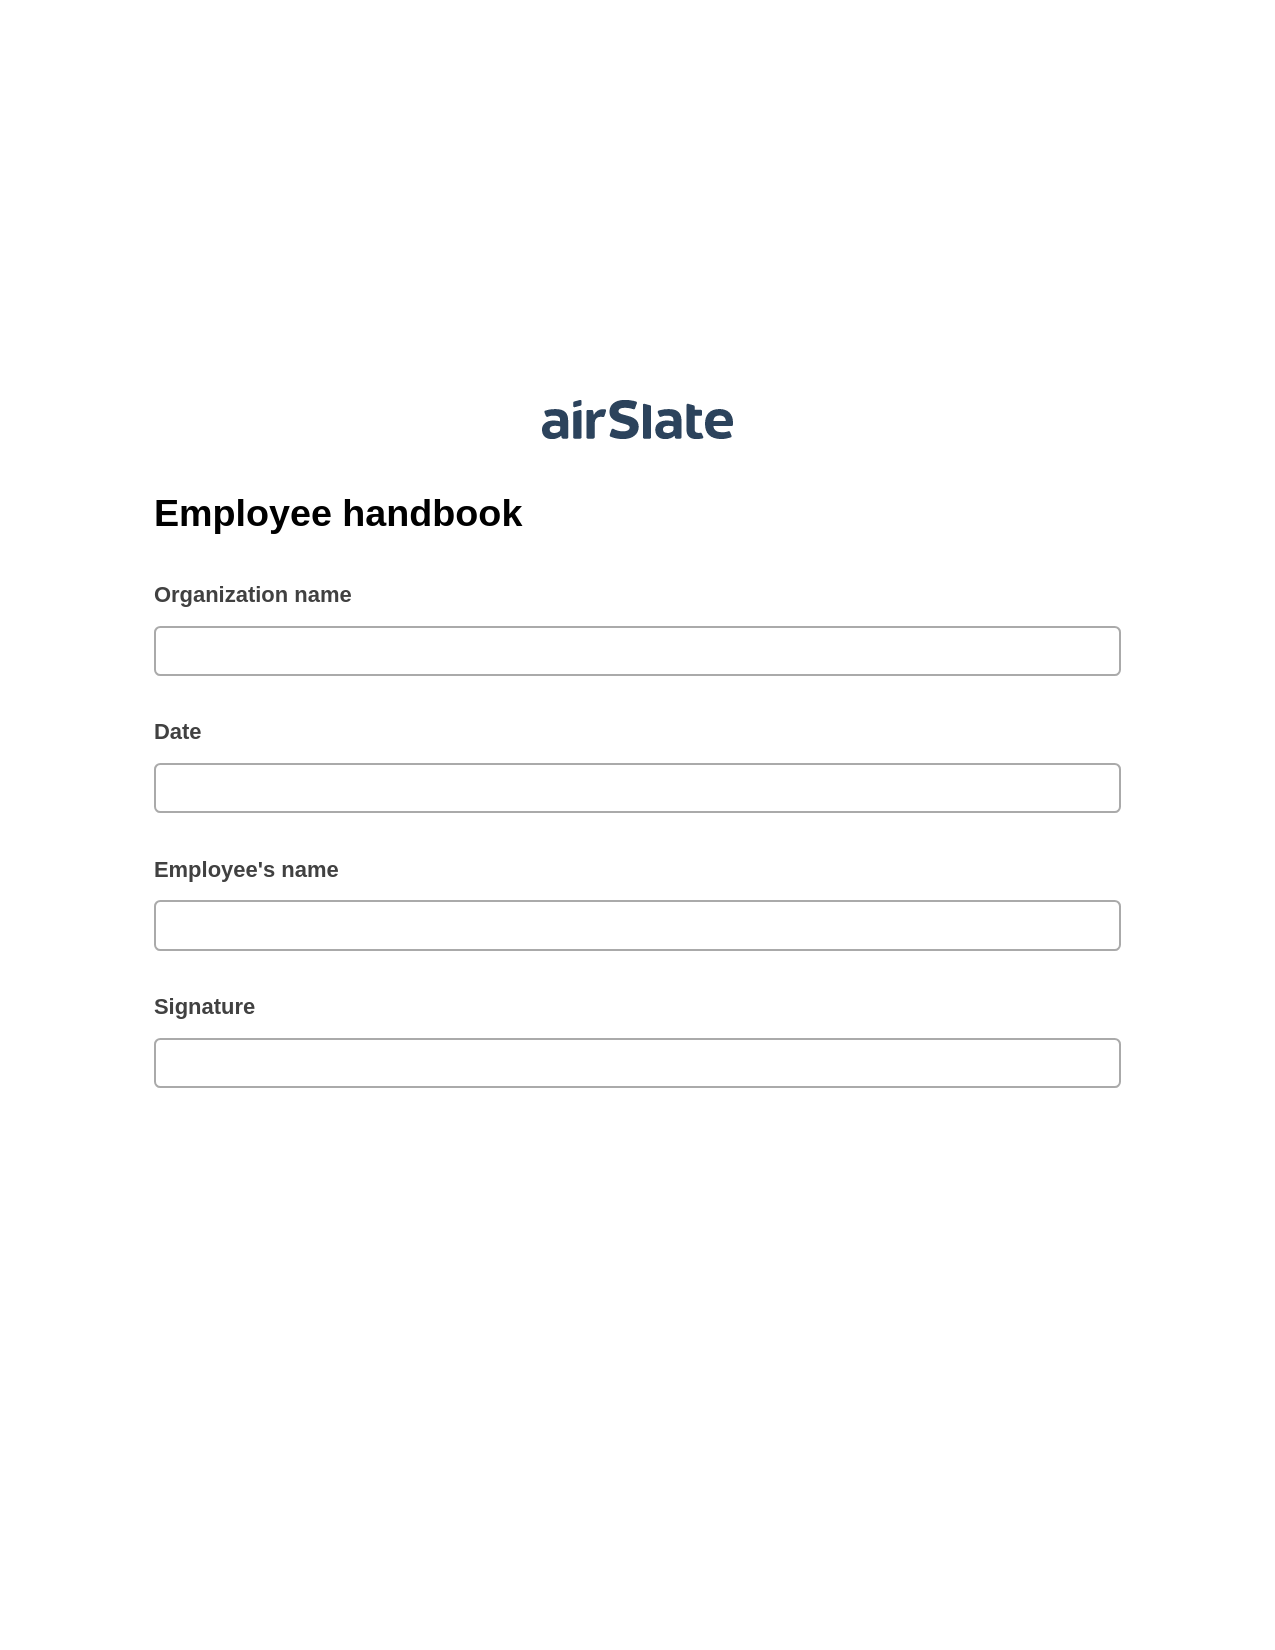 Multirole Employee handbook Pre-fill Slate from MS Dynamics 365 Records Bot, Create slate from another Flow Bot, OneDrive Bot